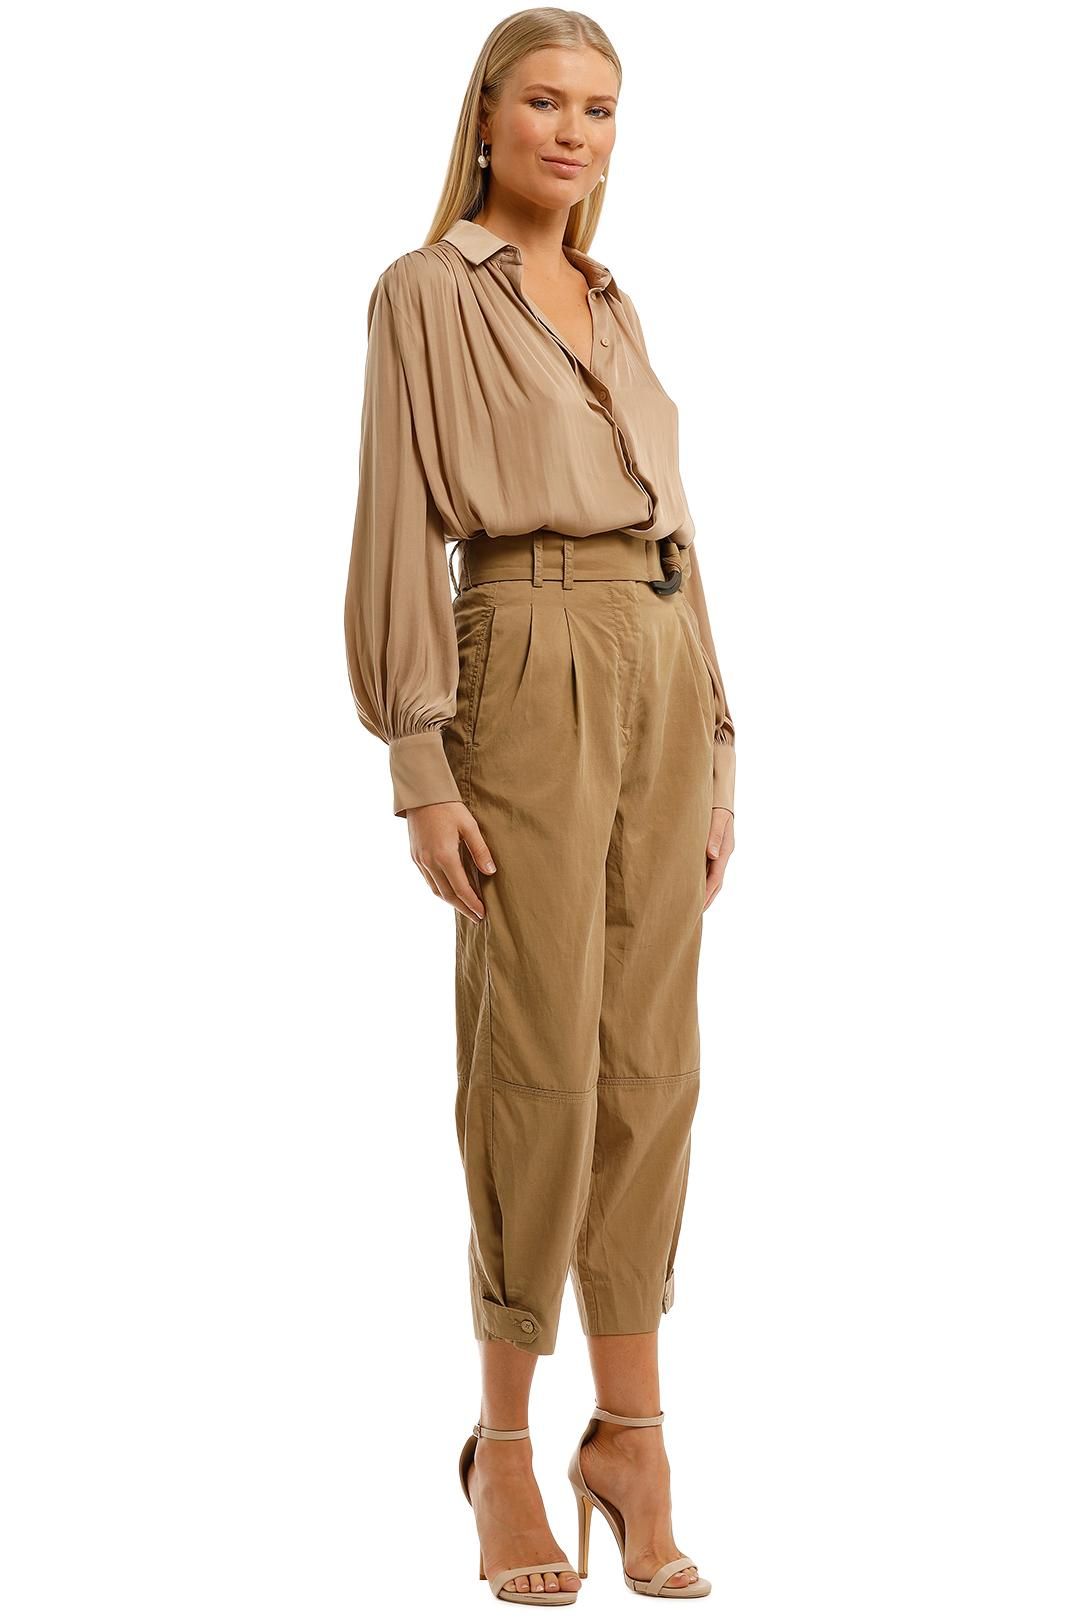 Witchery Buckle Utility Pant Caramel Brown with Pockets